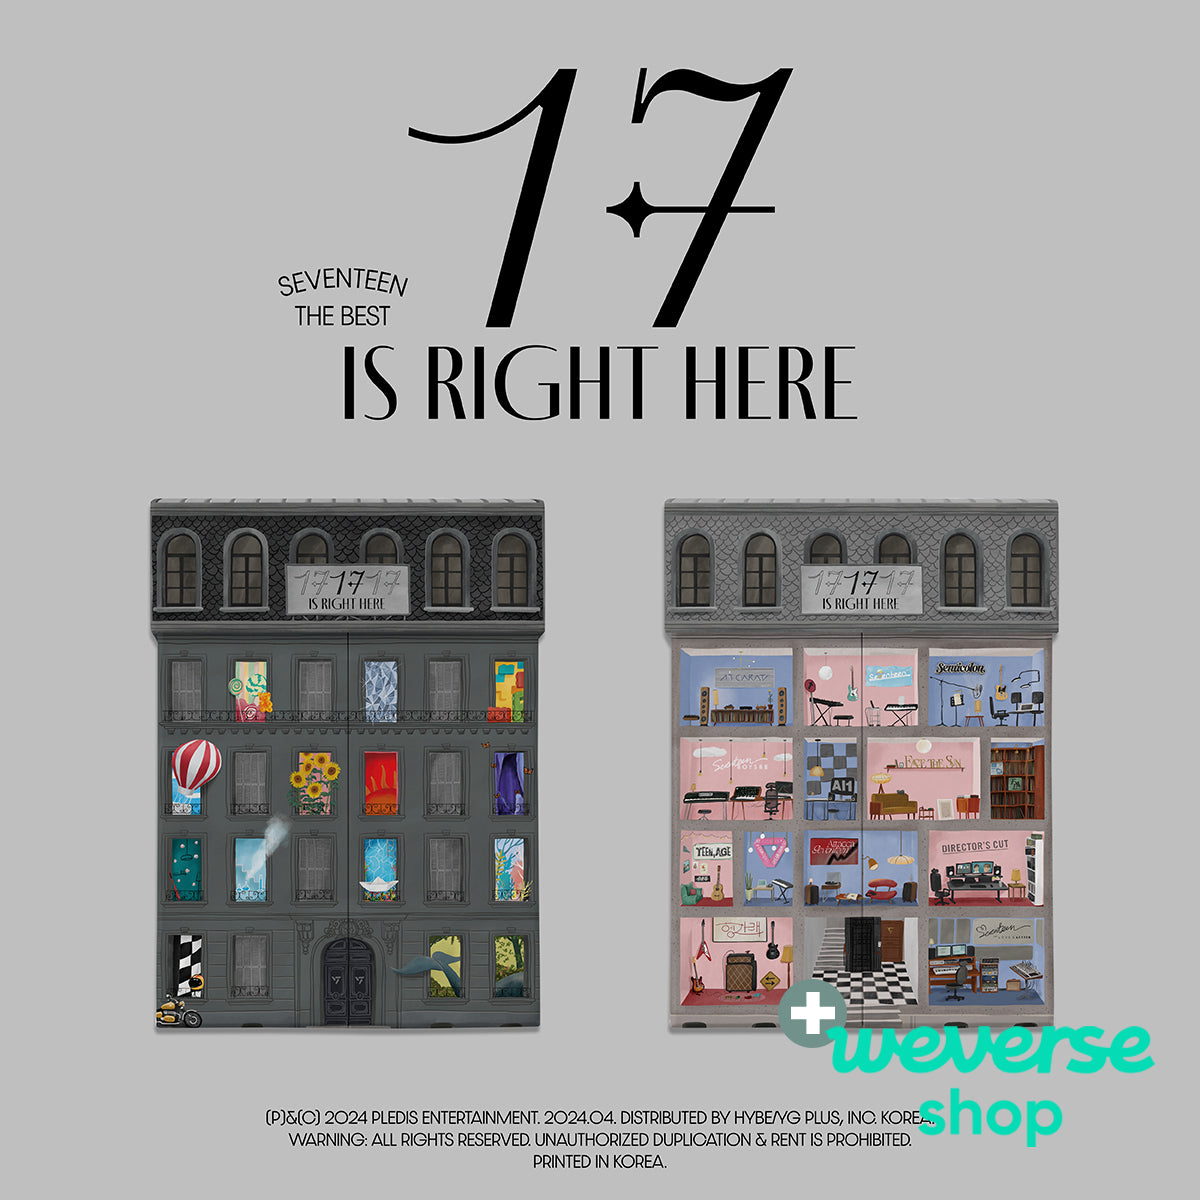 SEVENTEEN - 17 IS RIGHT HERE + Weverse Shop P.O.B [PRE-ORDER]